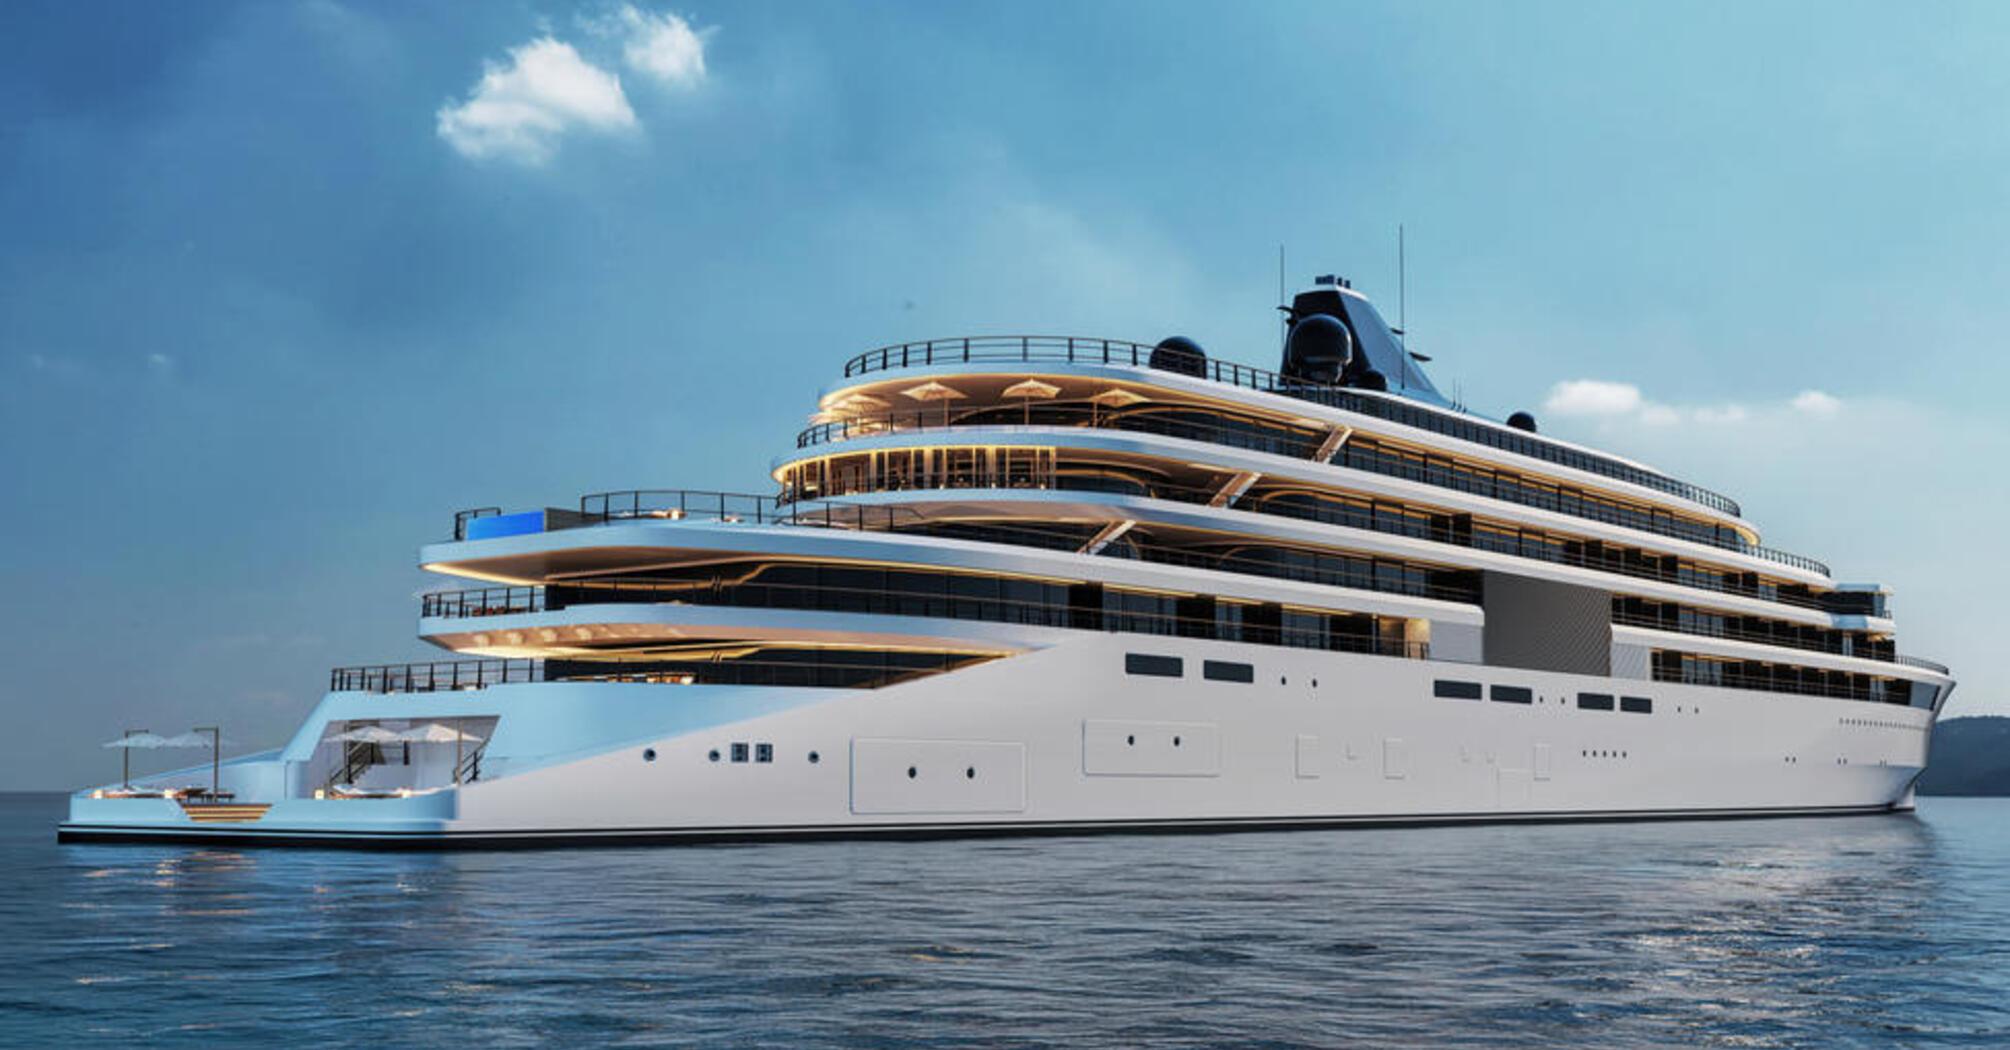 The global hospitality brand Aman has begun construction of the luxury motor yacht Aman at Sea